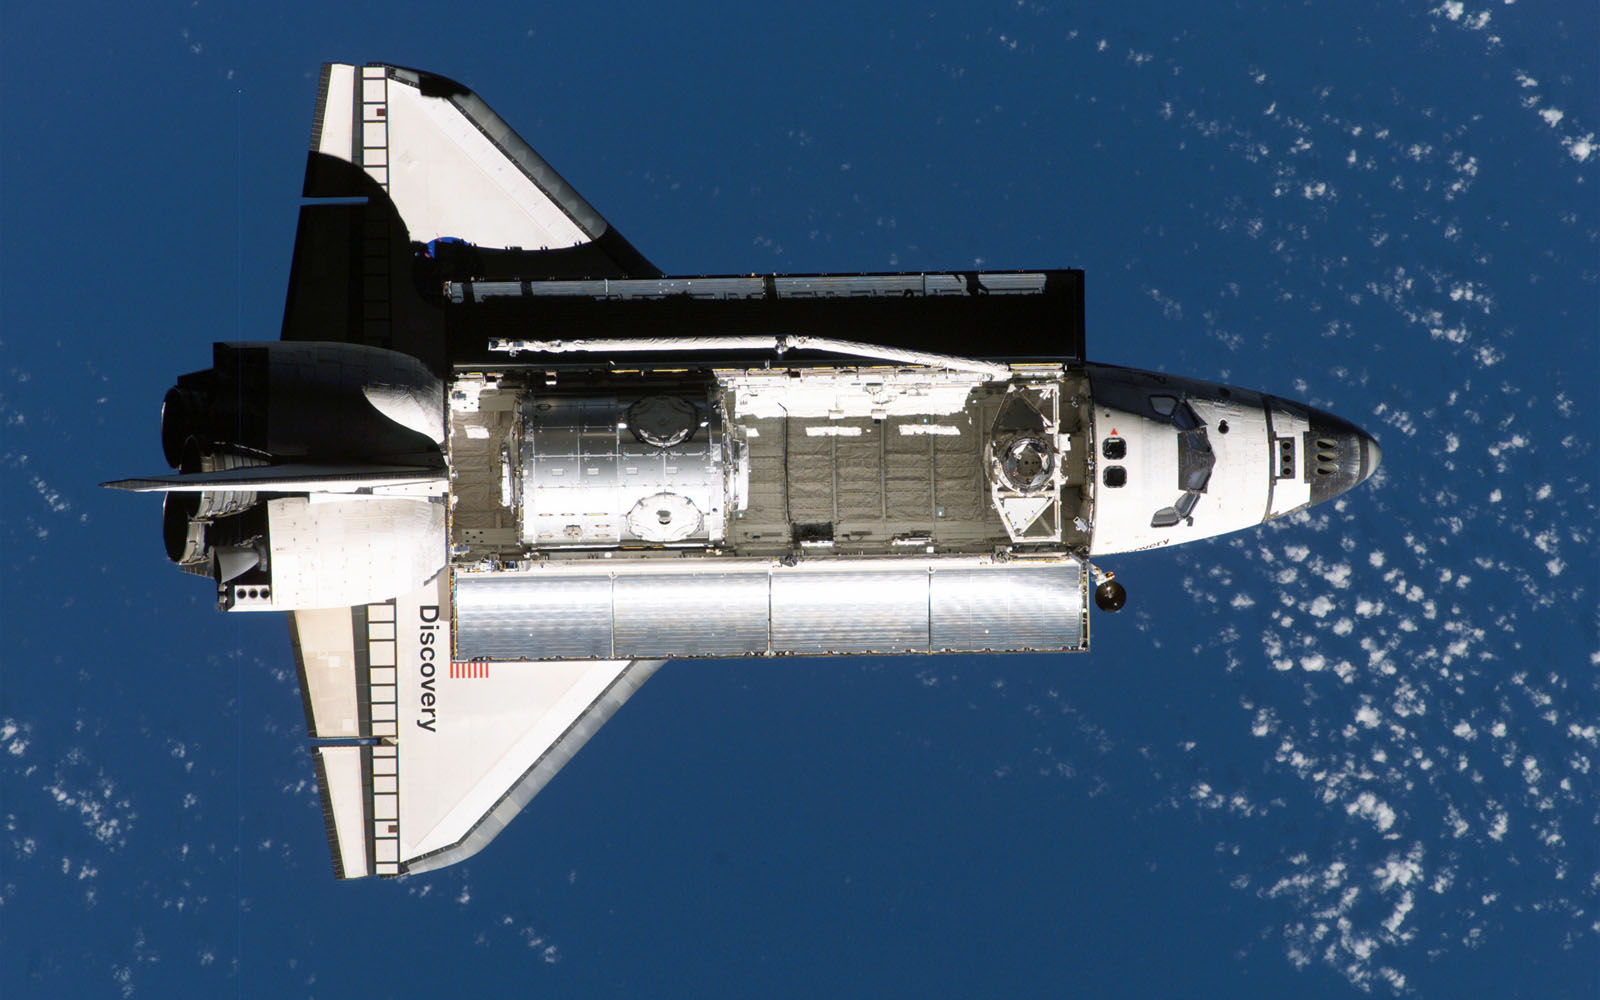 Tag Discovery Space Shuttle Photos Images Wallpapers and Pictures